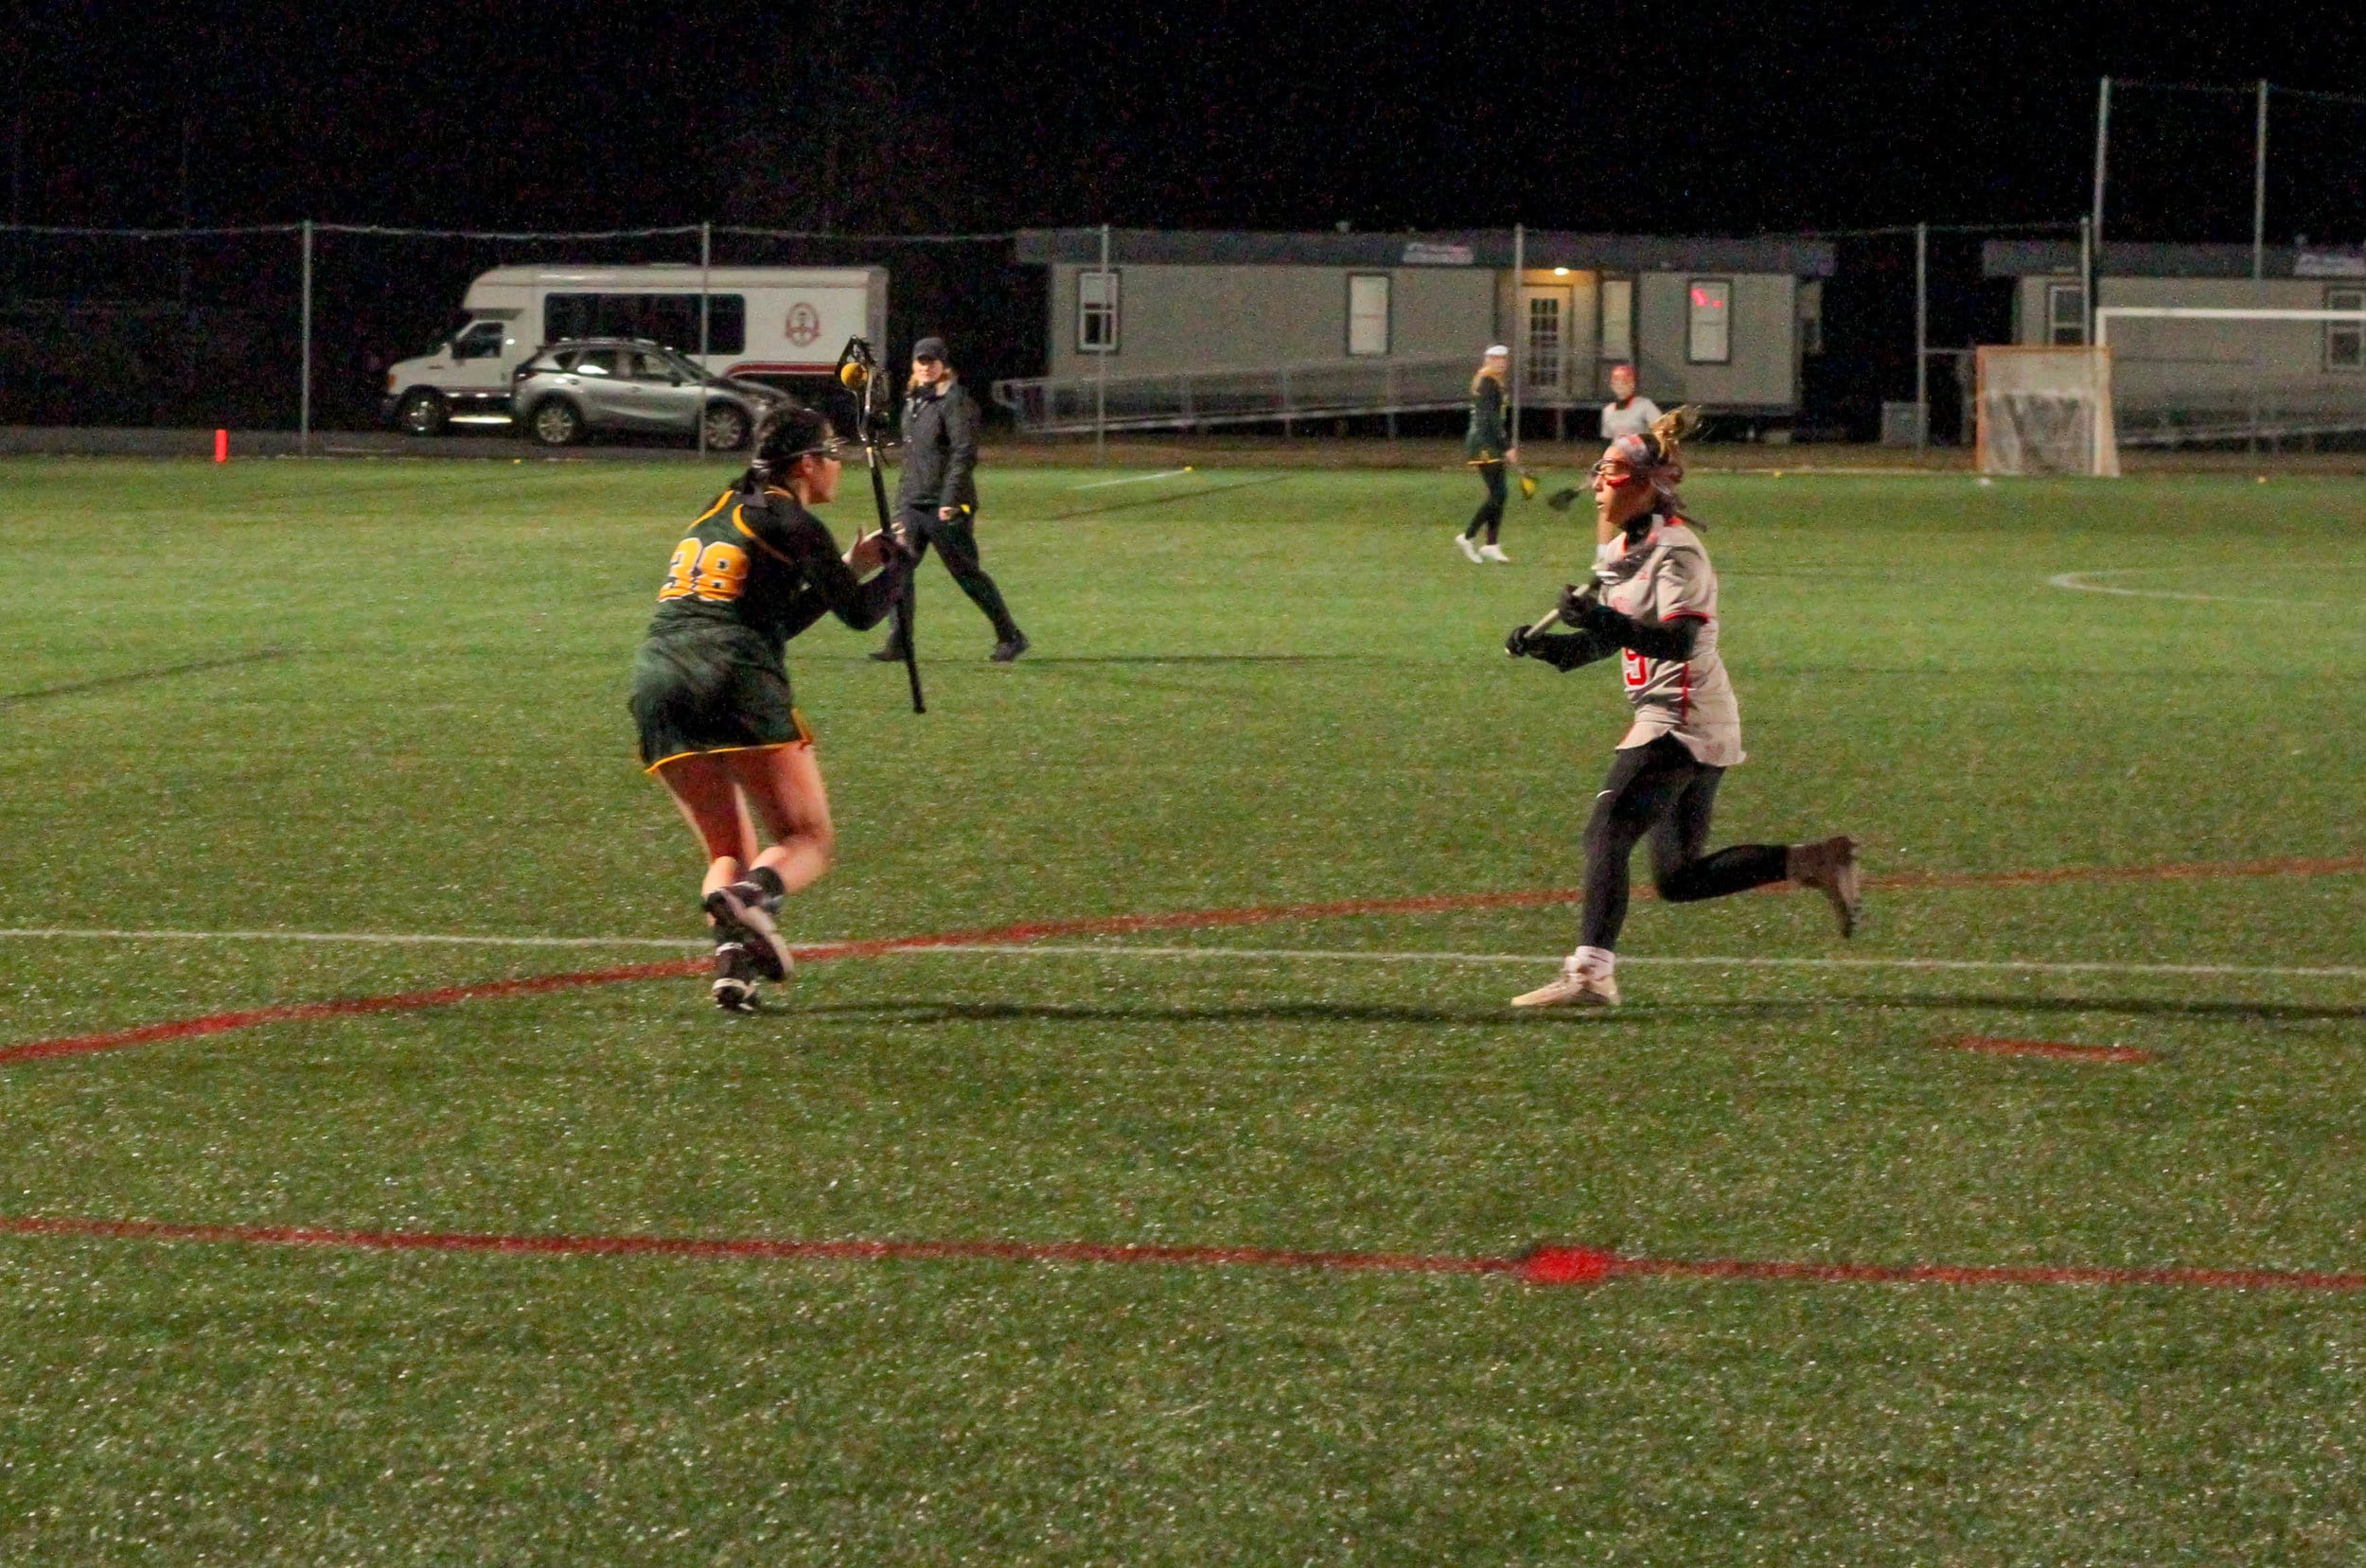 Aly Estes attacks the offensive player.